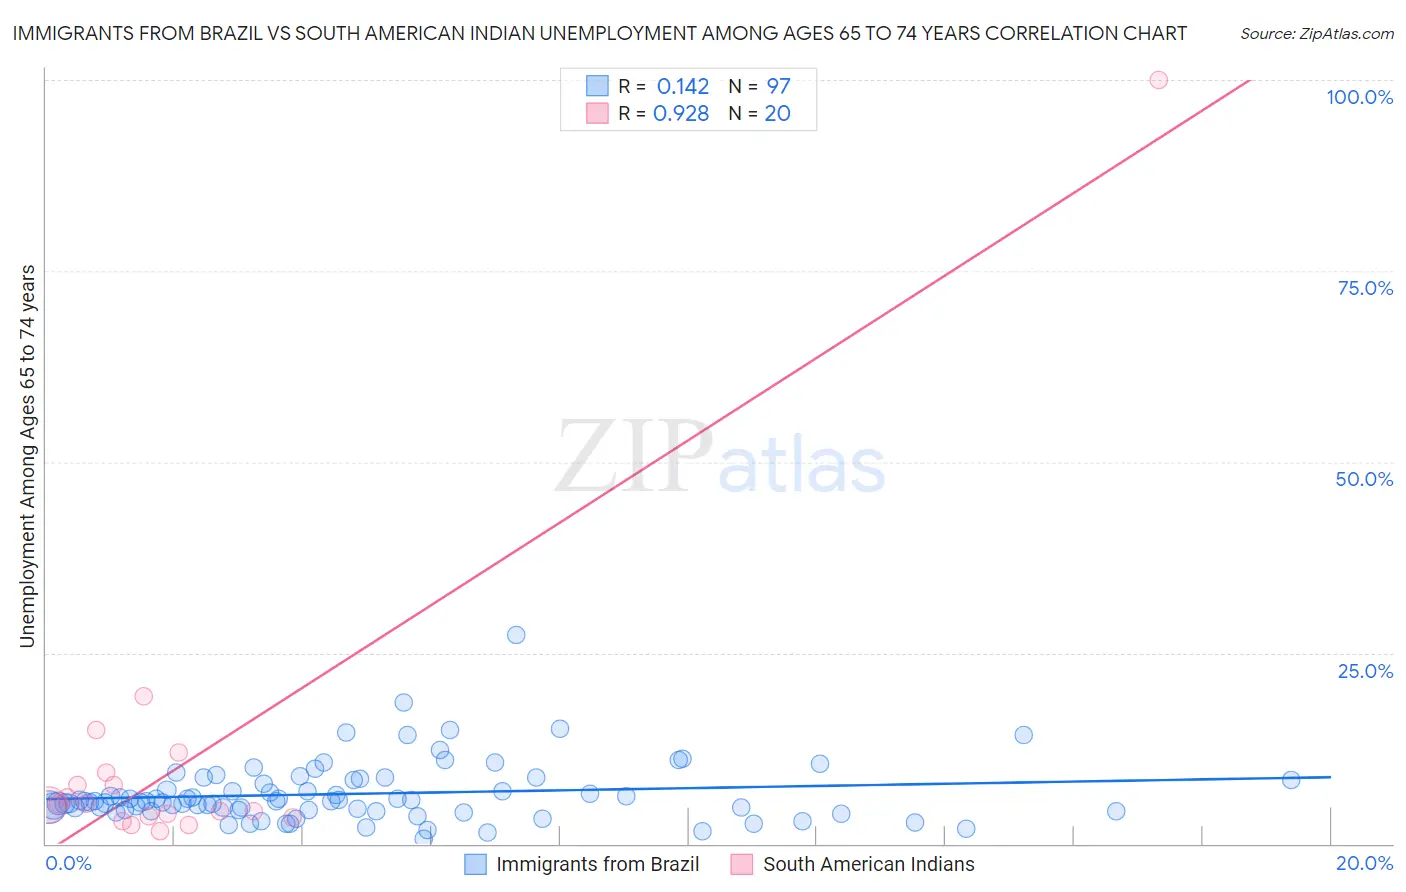 Immigrants from Brazil vs South American Indian Unemployment Among Ages 65 to 74 years